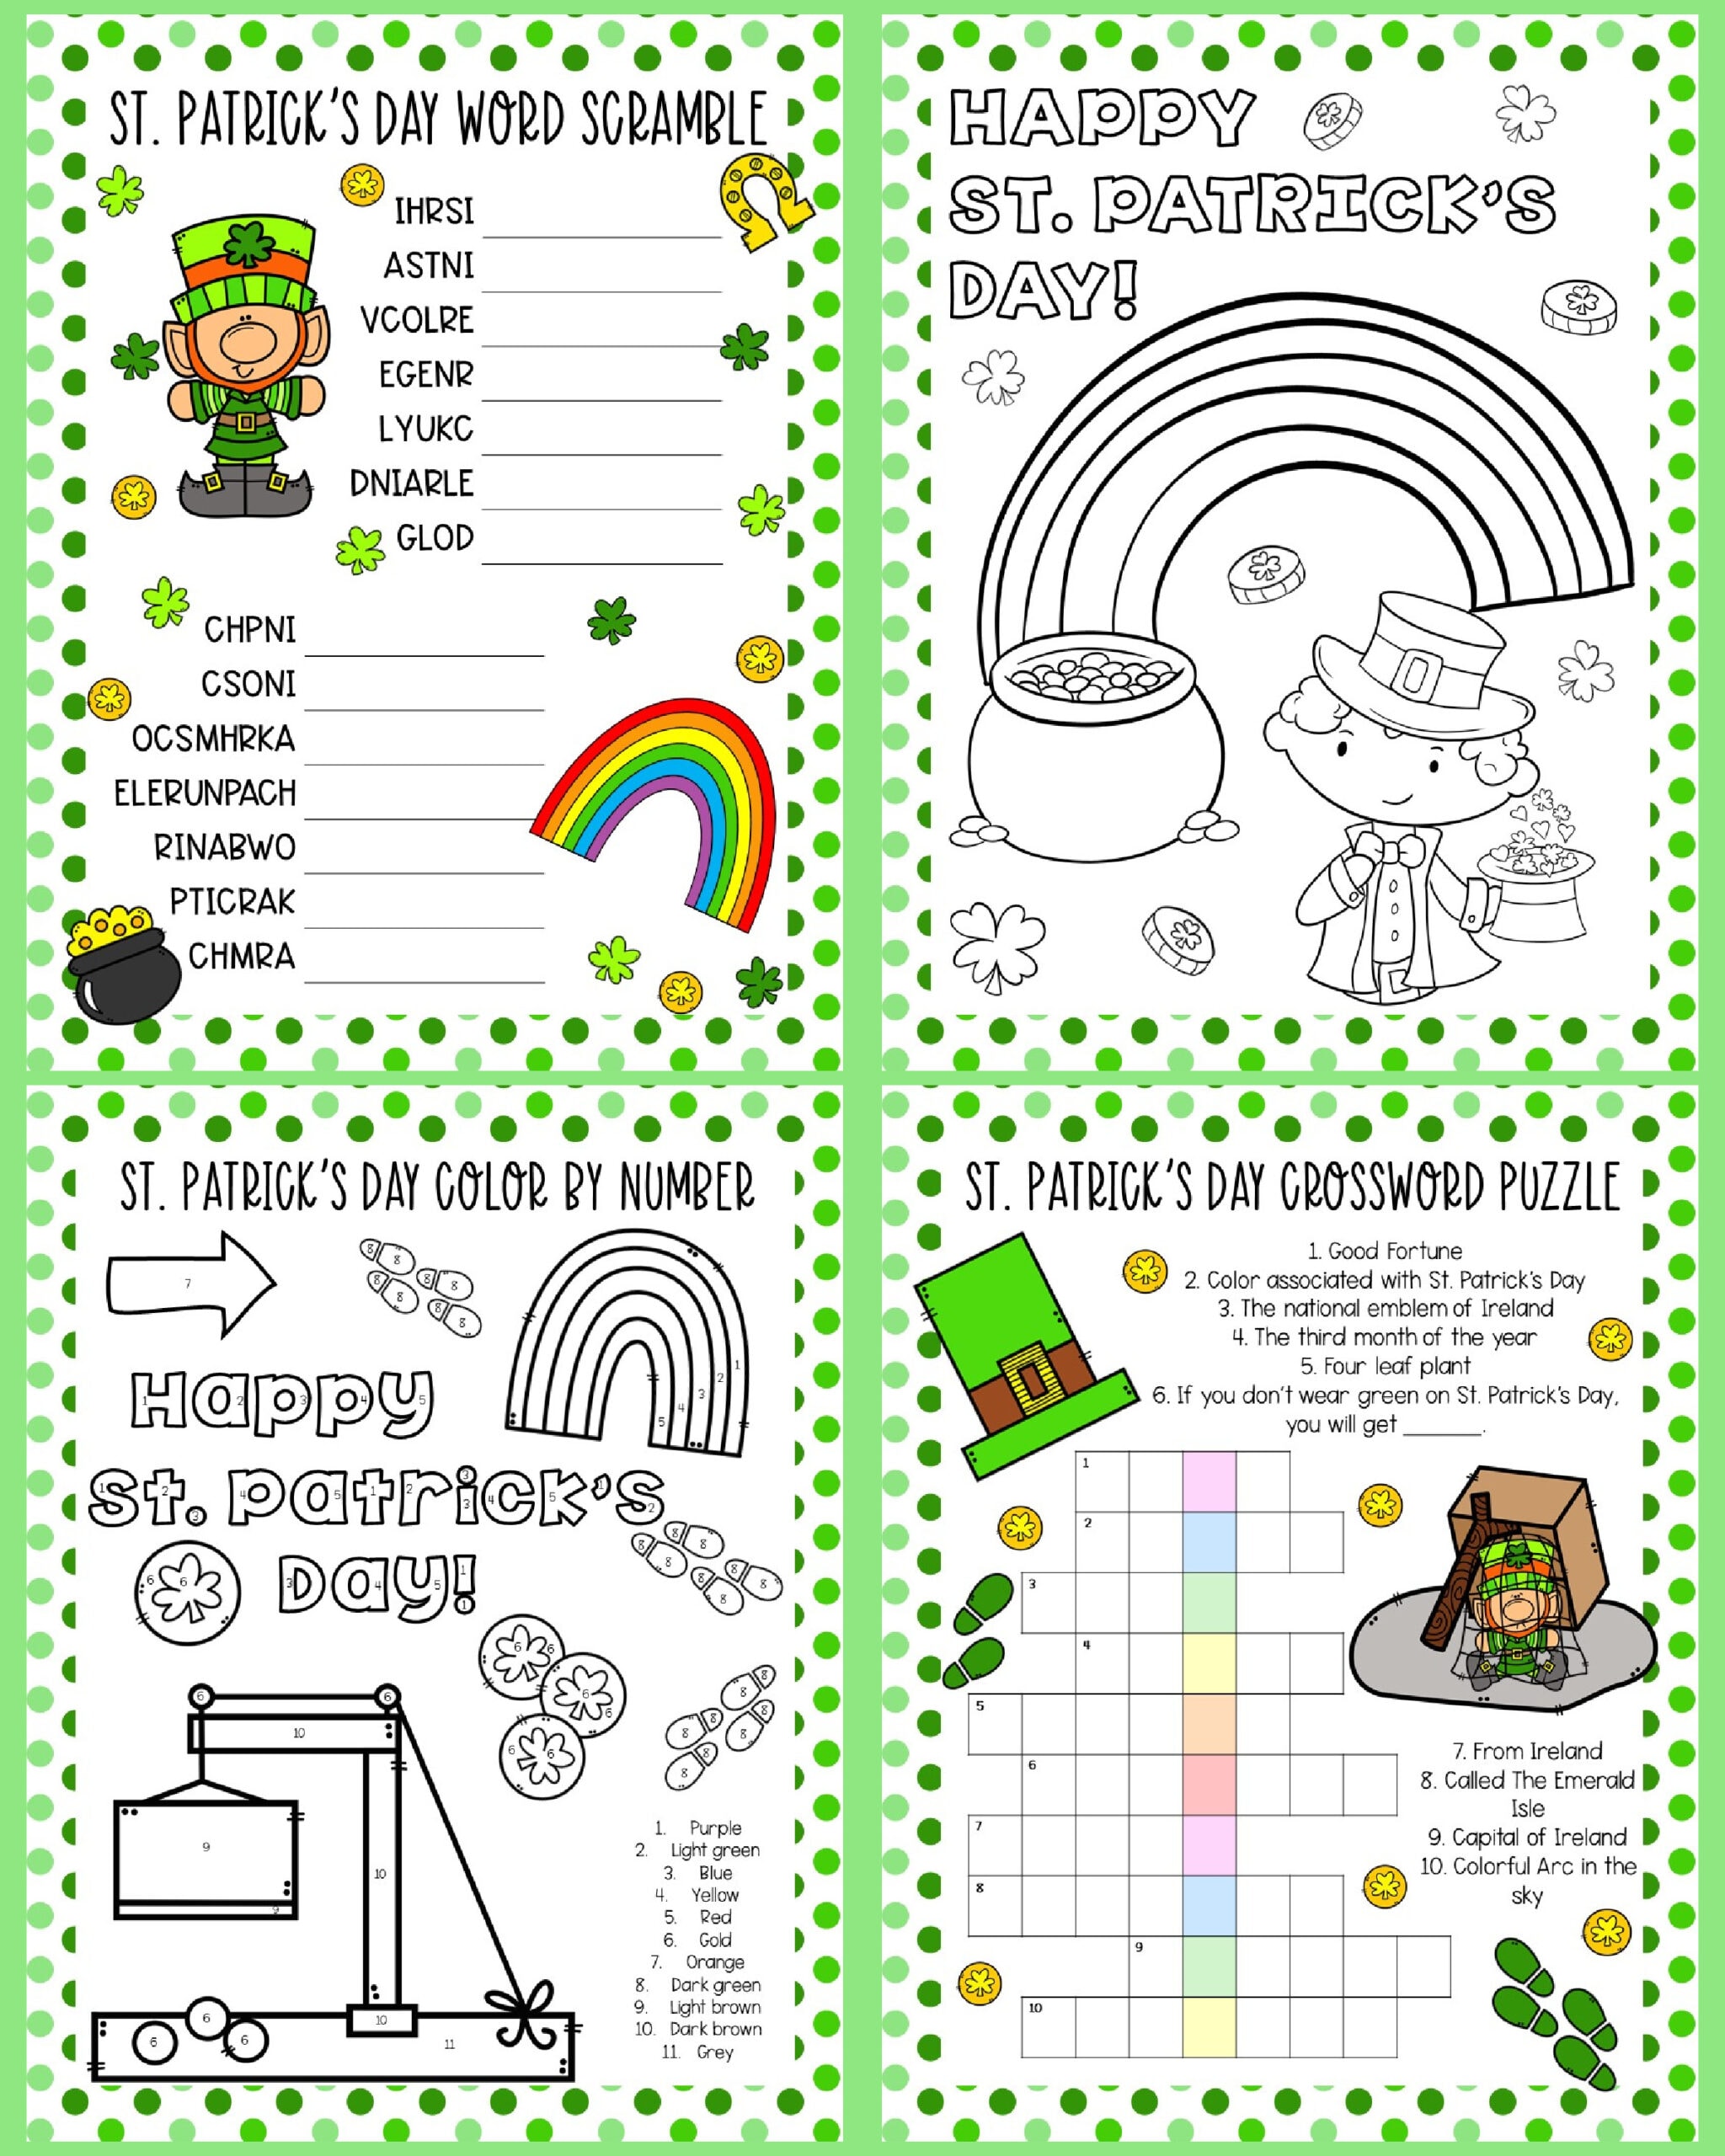 color-by-number-st-patrick-s-day-preschool-worksheets-rainbow-pot-of